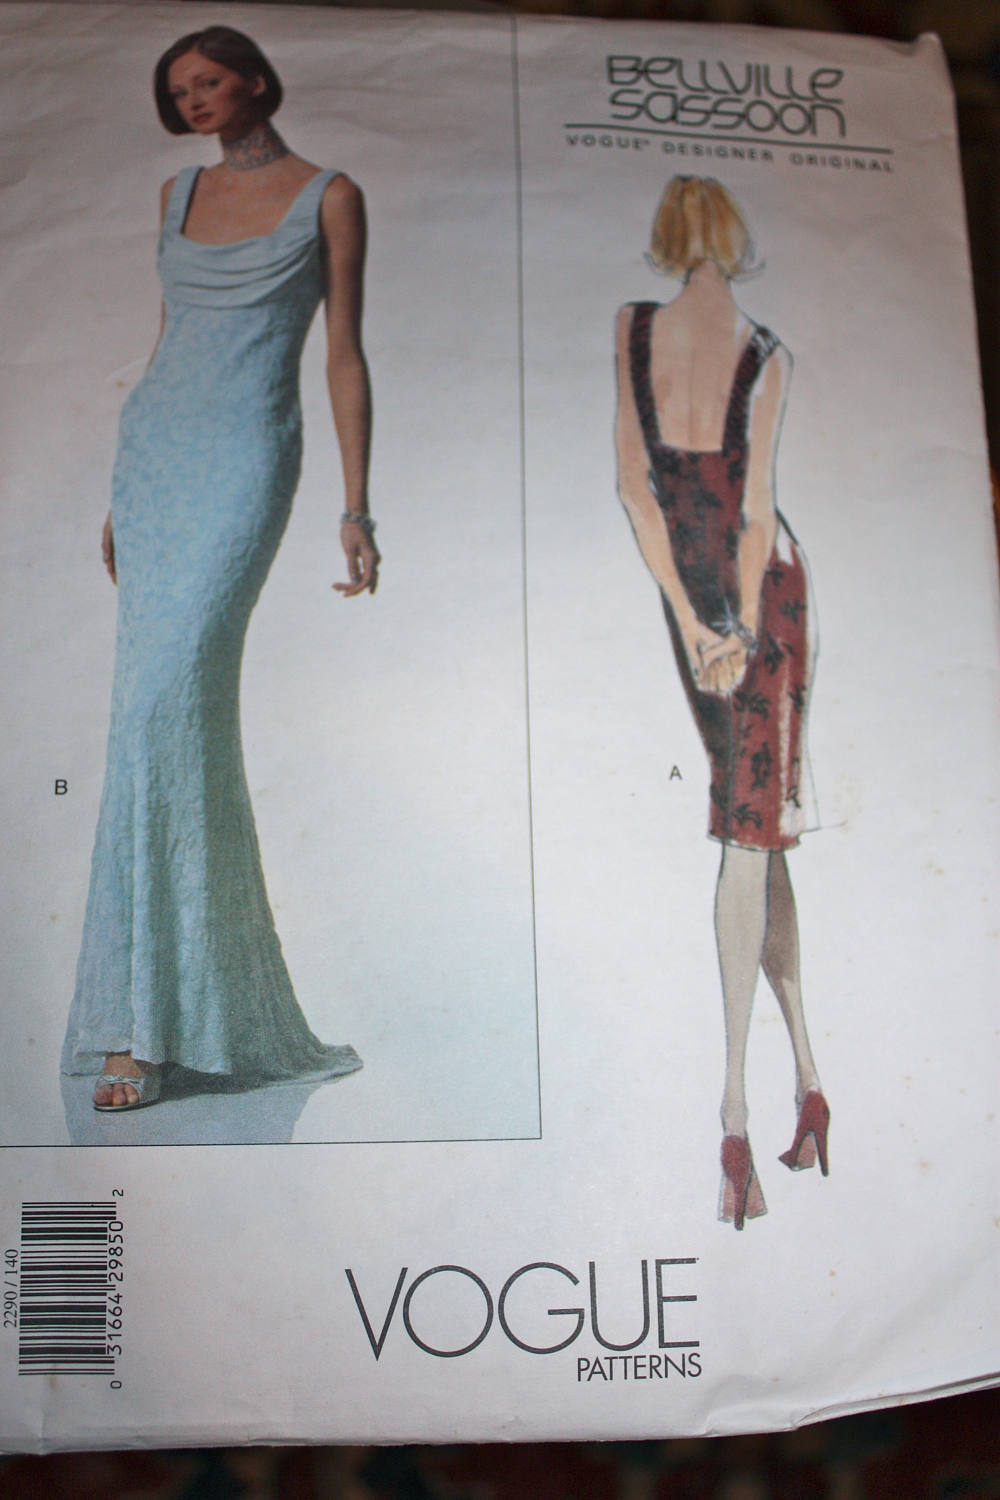 Elegant Evening Gown PatternVogue 2290 by Bellville | Etsy